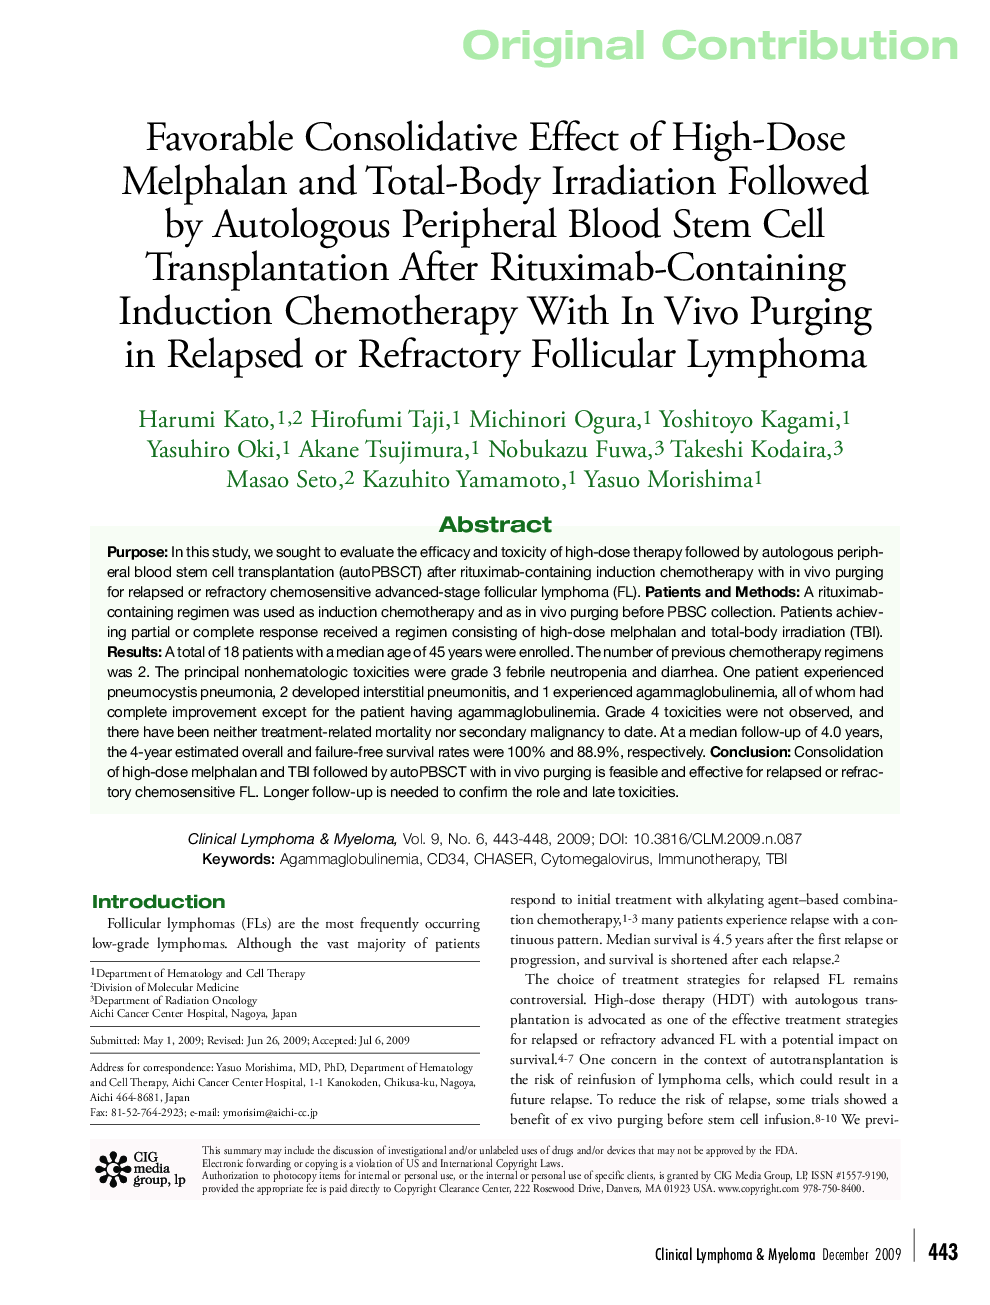 Favorable Consolidative Effect of High-Dose Melphalan and Total-Body Irradiation Followed by Autologous Peripheral Blood Stem Cell Transplantation After Rituximab-Containing Induction Chemotherapy With In Vivo Purging in Relapsed or Refractory Follicular 